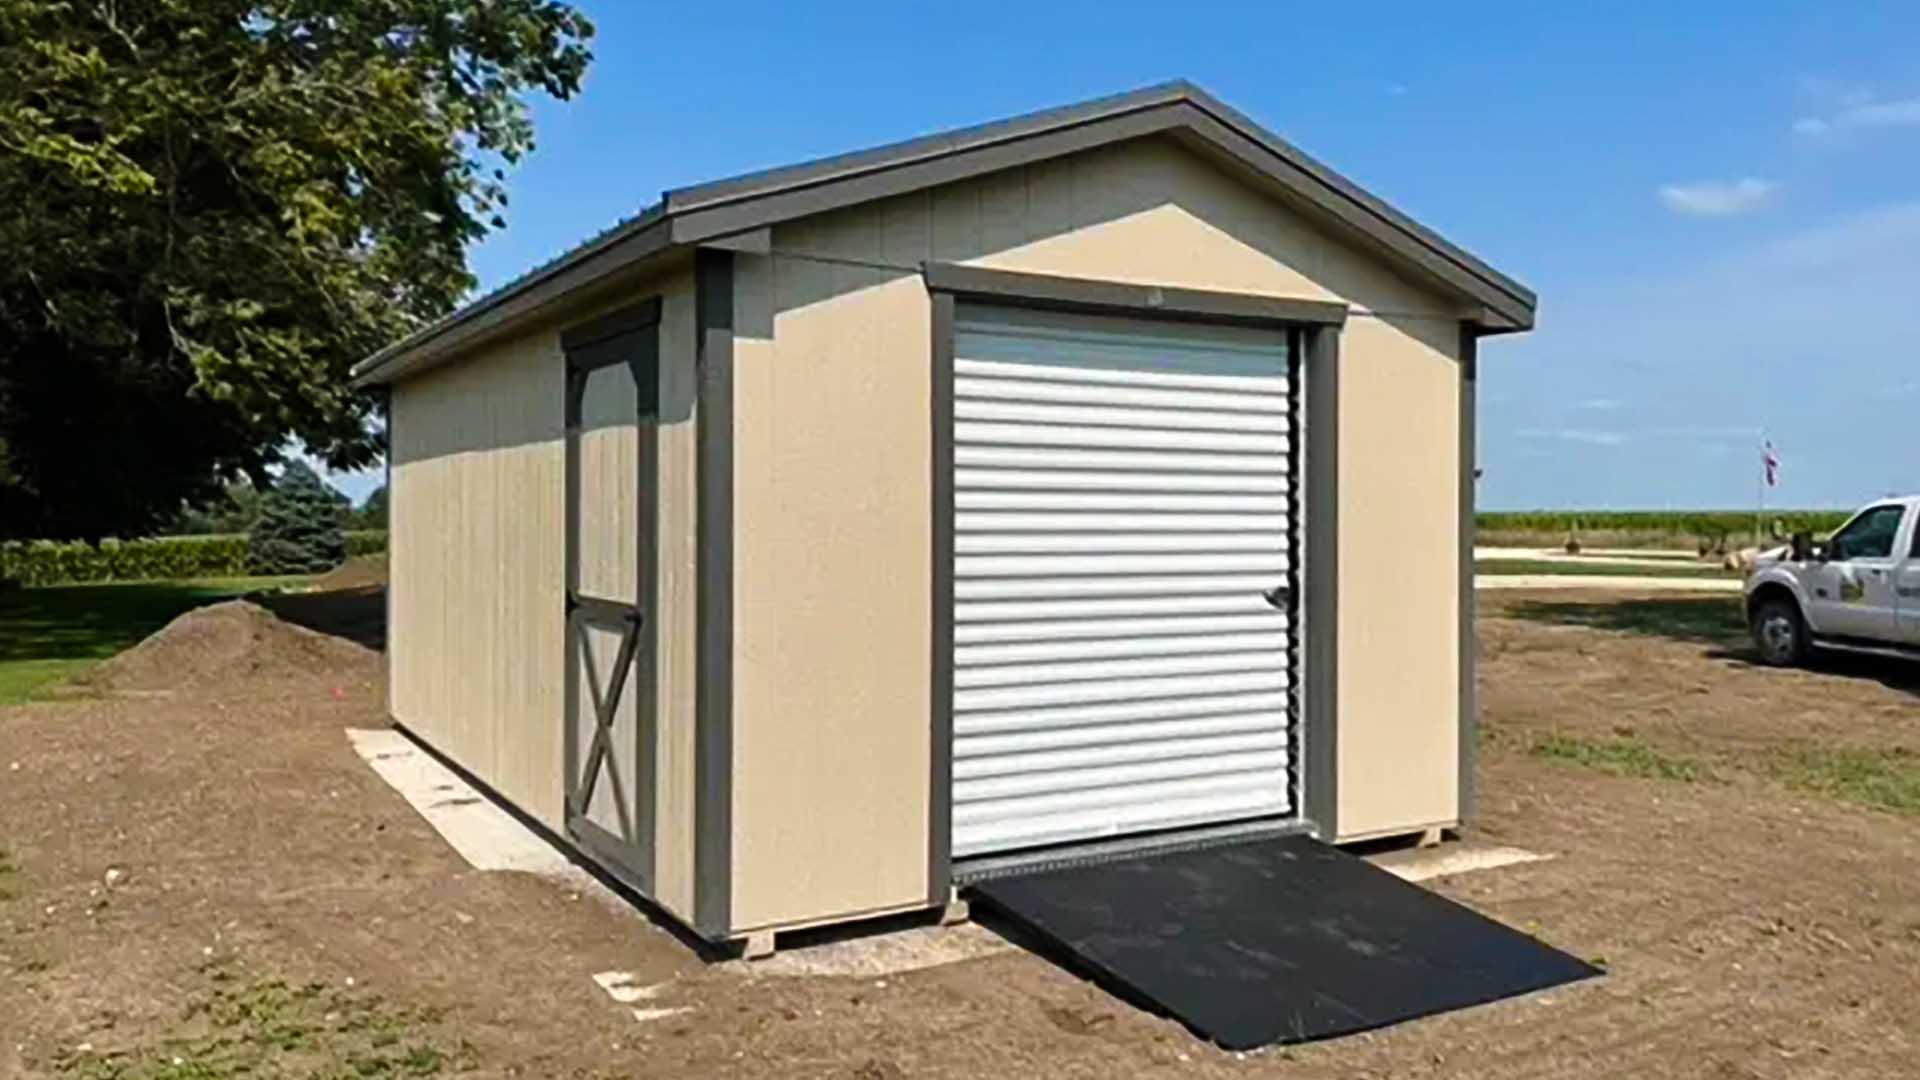 Sun Rise Sheds | What Are The Top Three Reasons To Invest In A Ramp For A Shed?